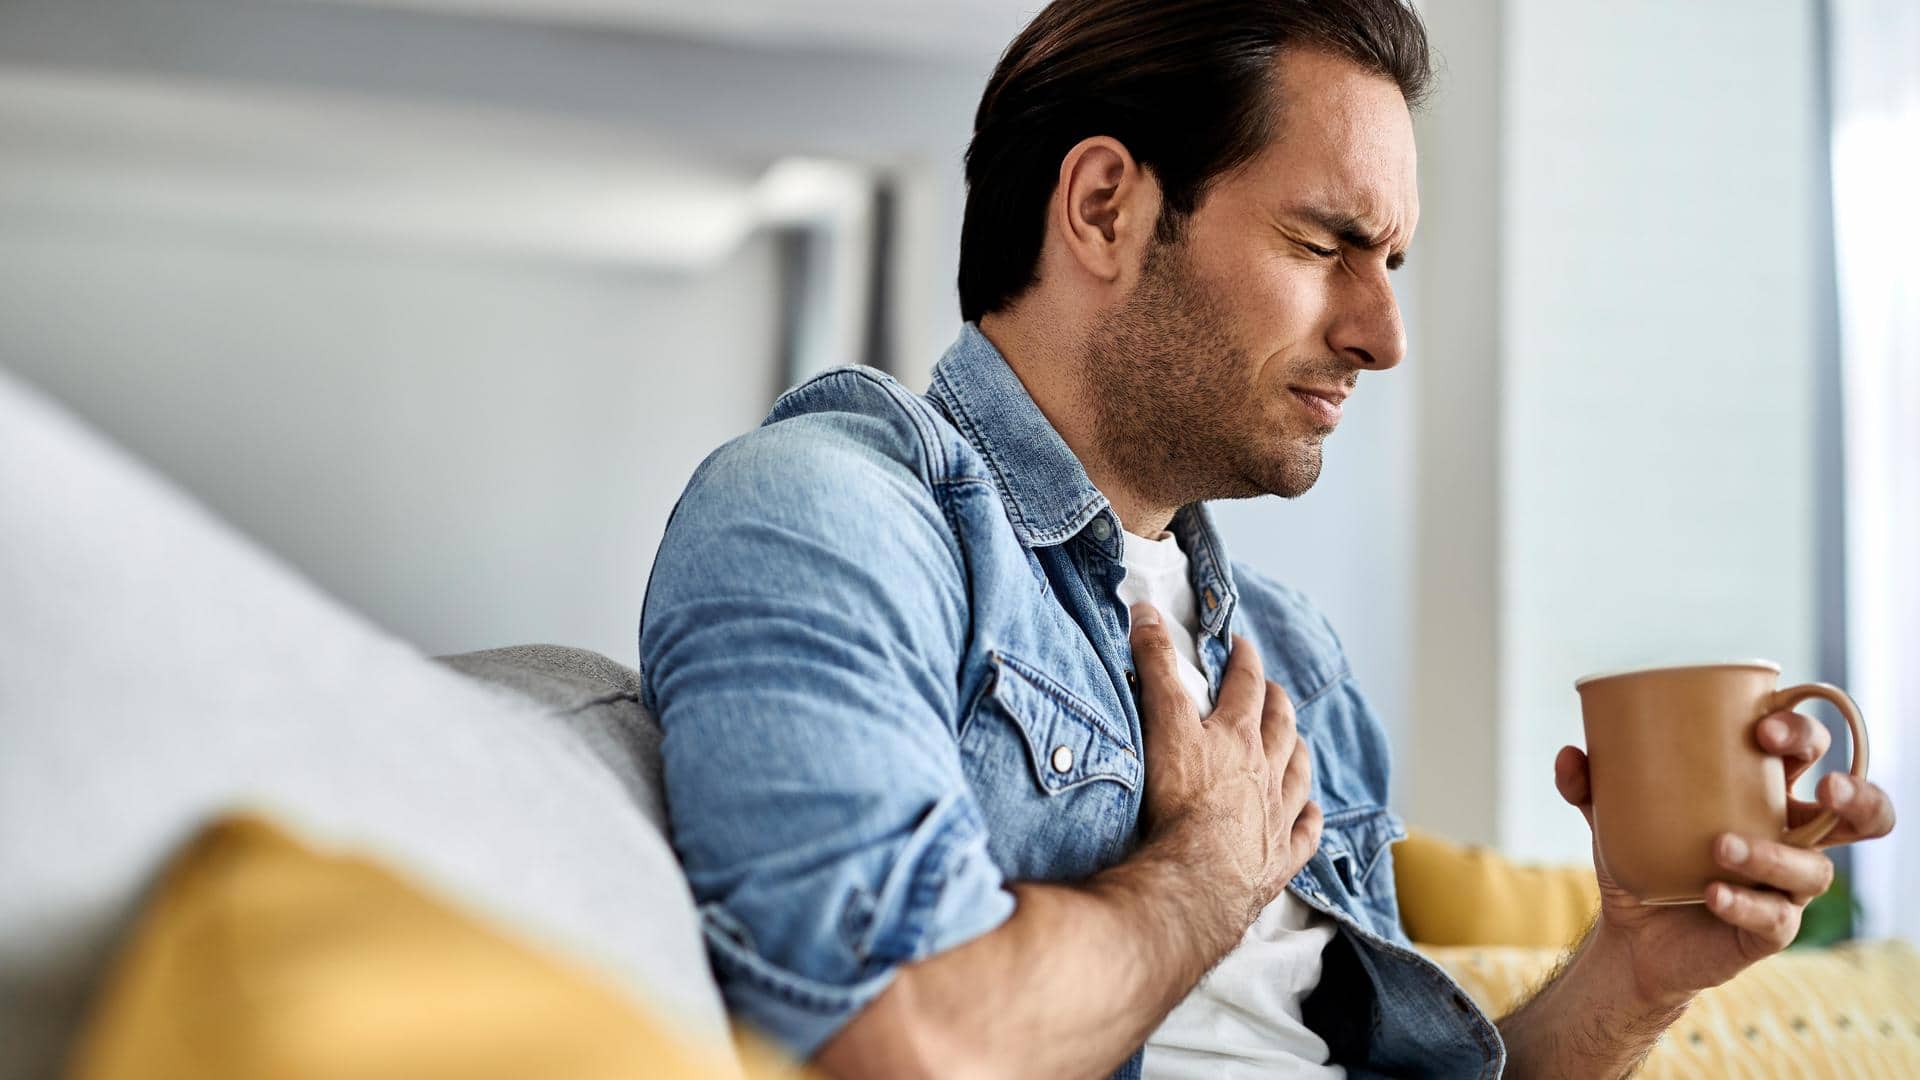 These home remedies for chest congestion are easy and effective